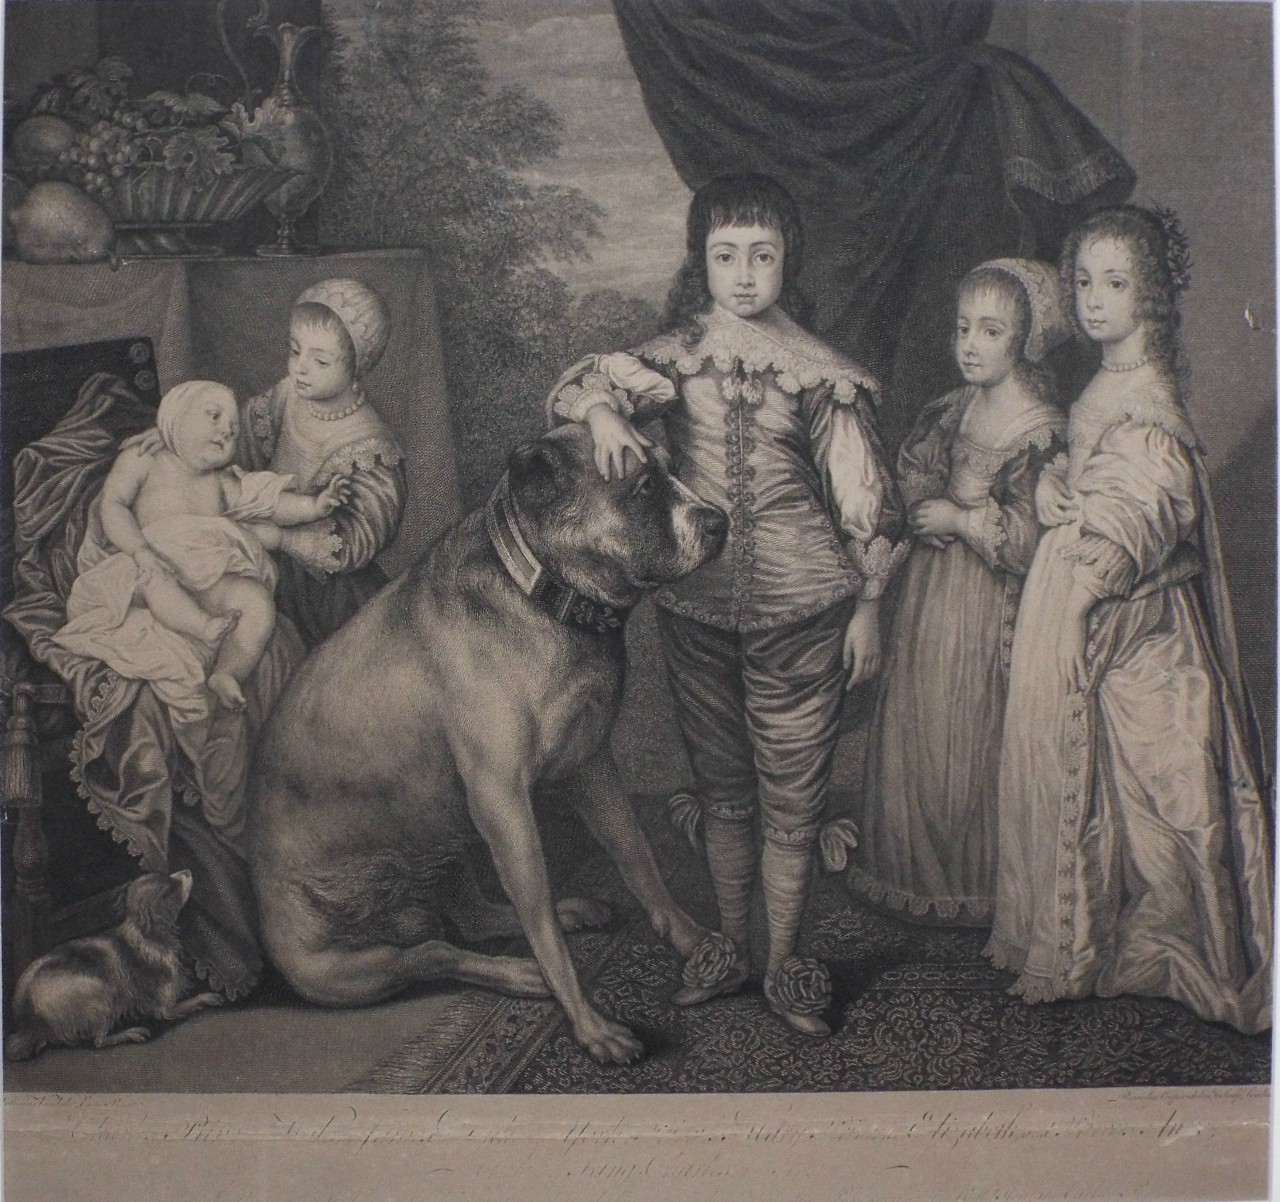 Print - Charles Prince of Wales, James Duke of York, Princess Mary, Princess Elizabeth, and Princess Anne, Children of King Charles the First. - Cooper